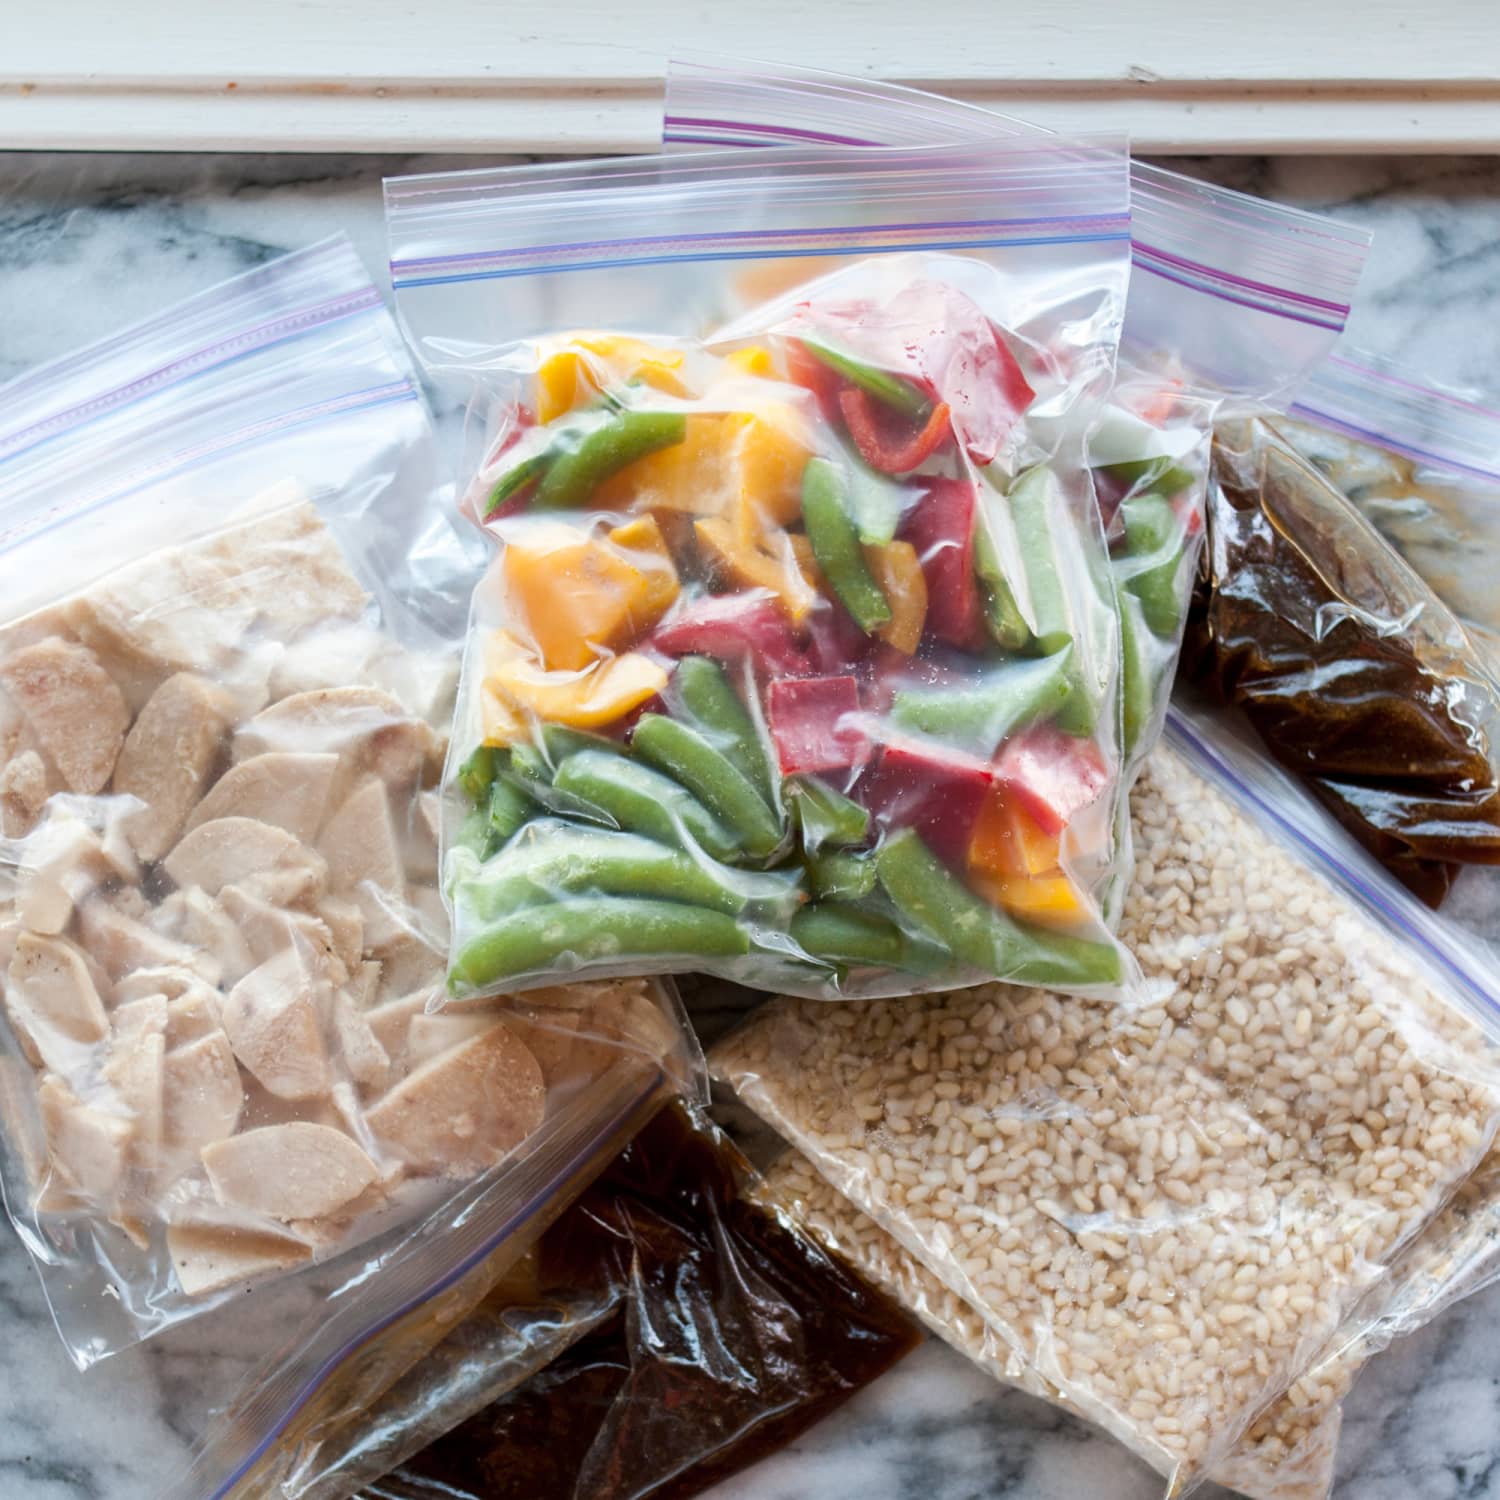 Two Easy Hacks for “Vacuum-Sealing” Bags Without a Vacuum Sealer | Kitchn